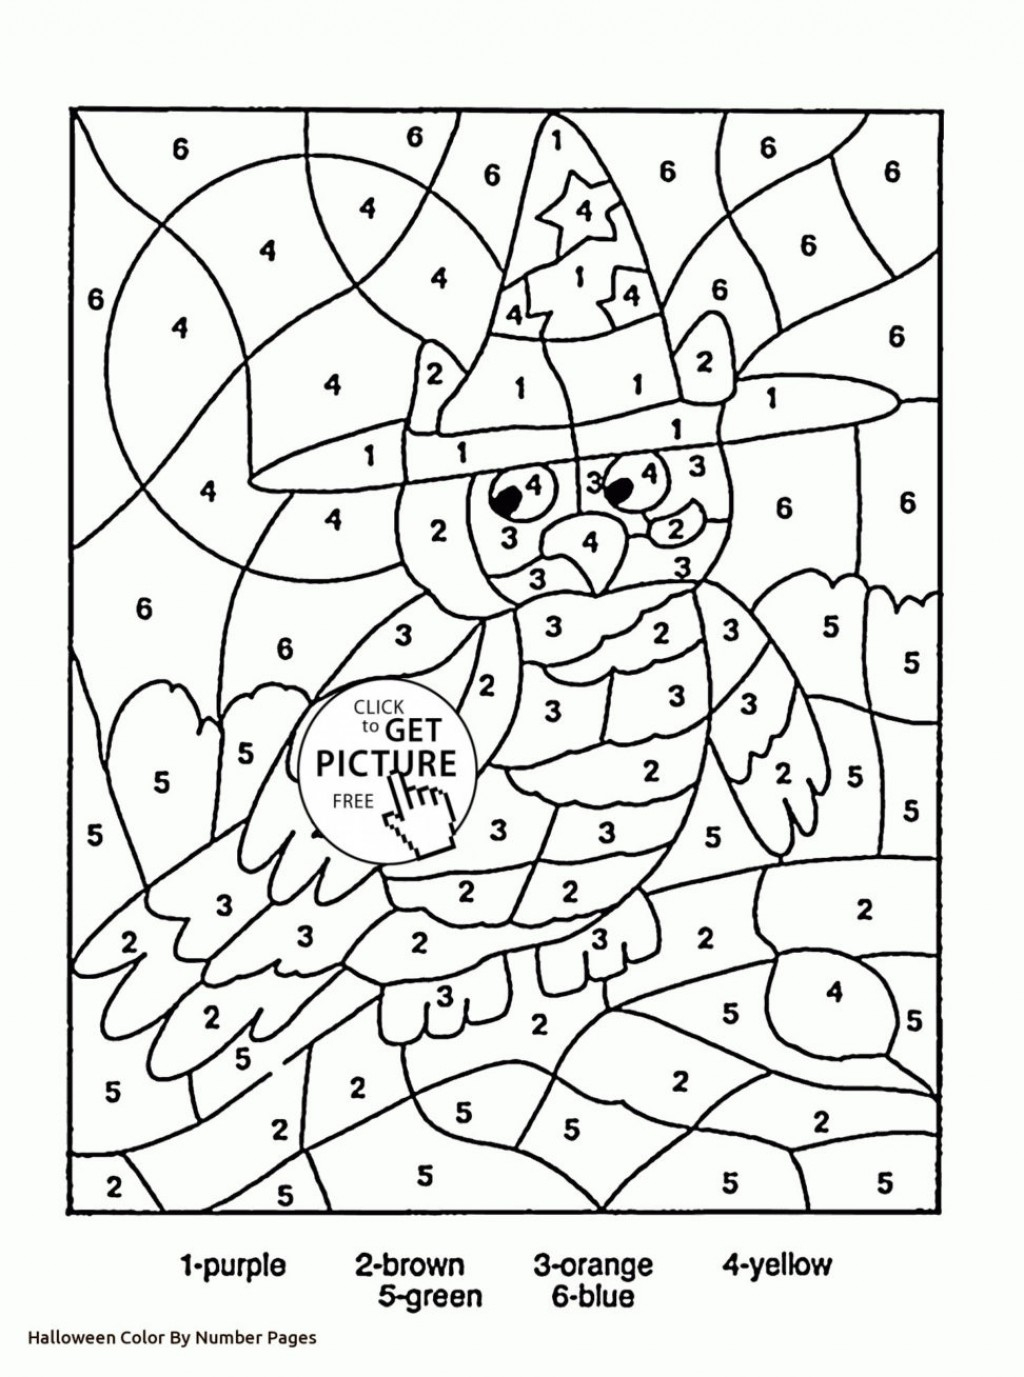 3rd-grade-coloring-pages-multiplication-color-by-number-worksheets